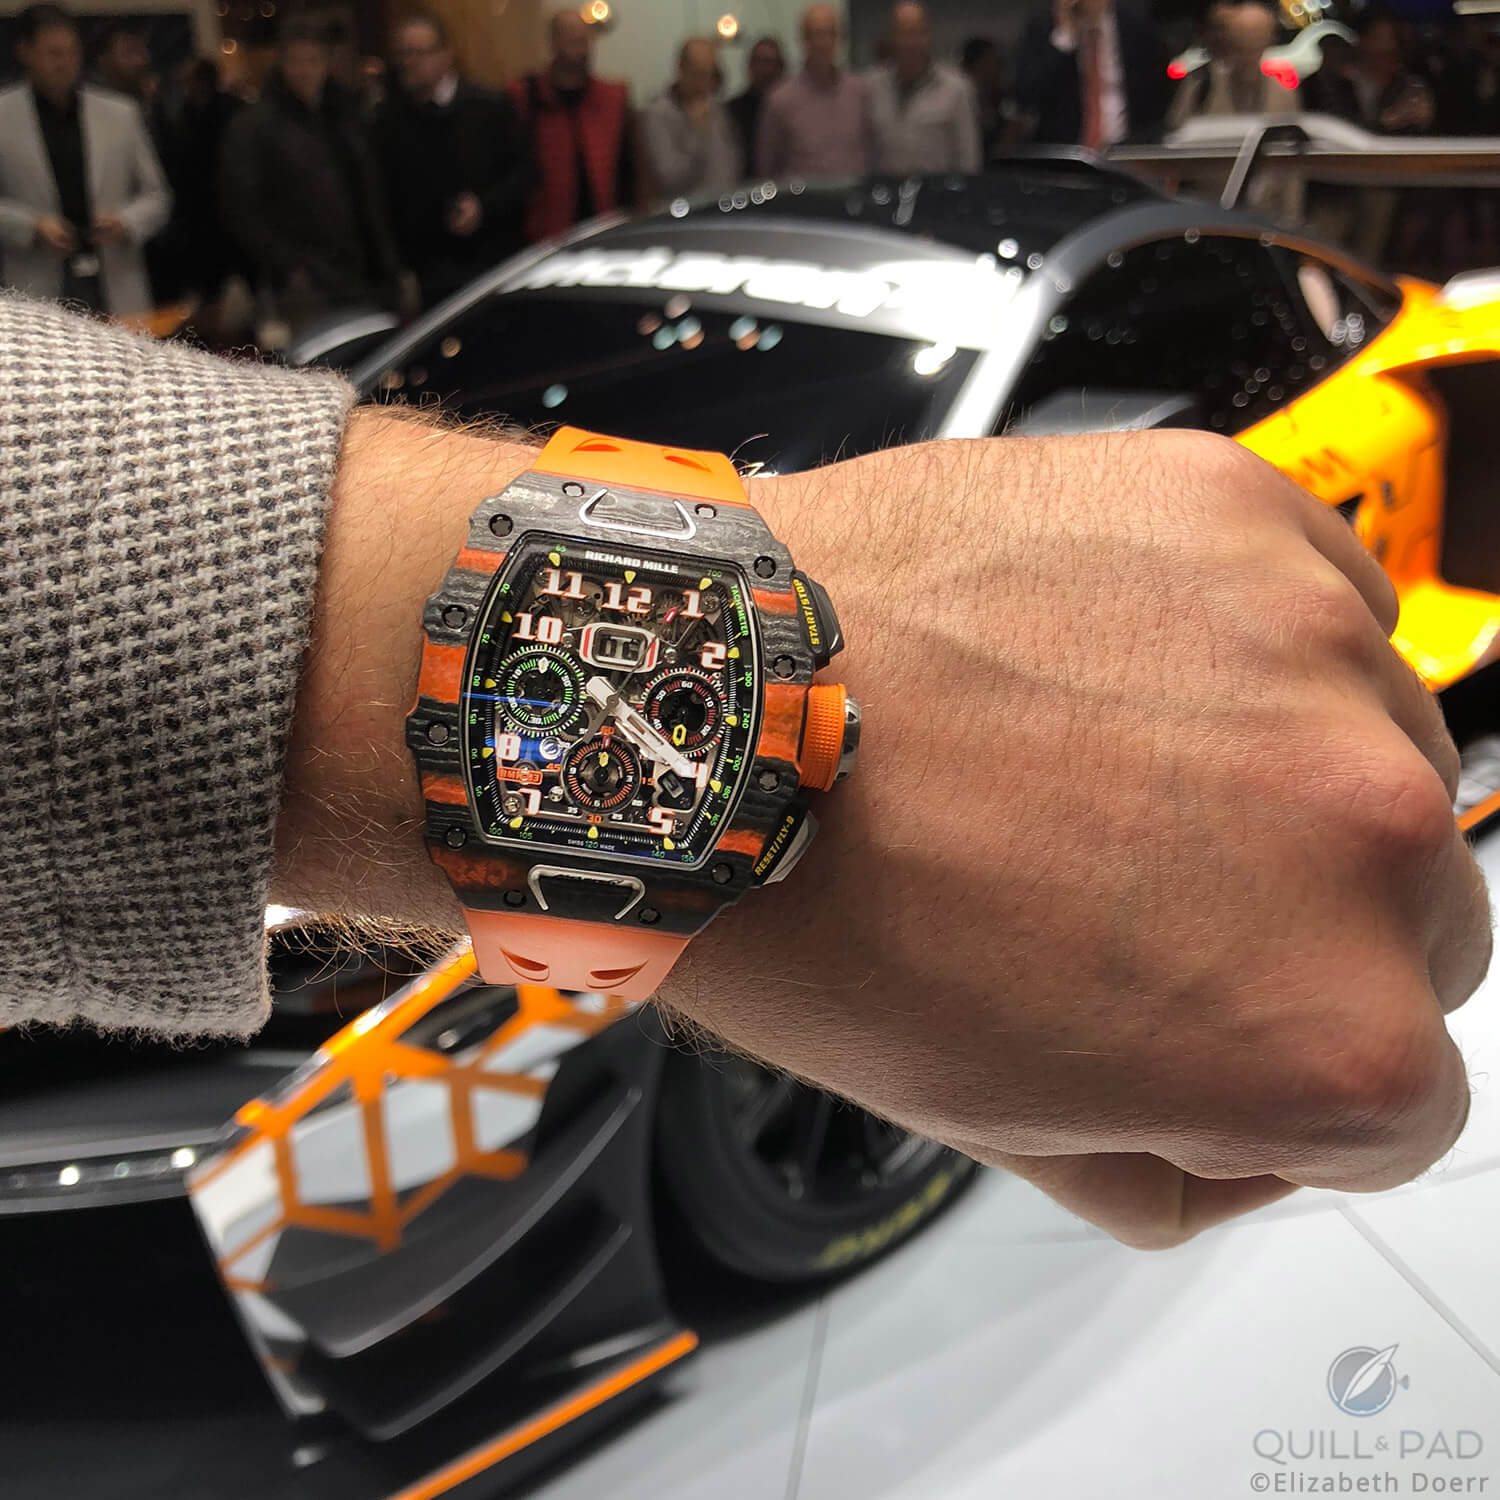 Richard Mille RM-11-03 McLaren Automatic Flyback Chronograph in front of the McLaren Senna GTR Concept at the 2018 Geneva Motor Show